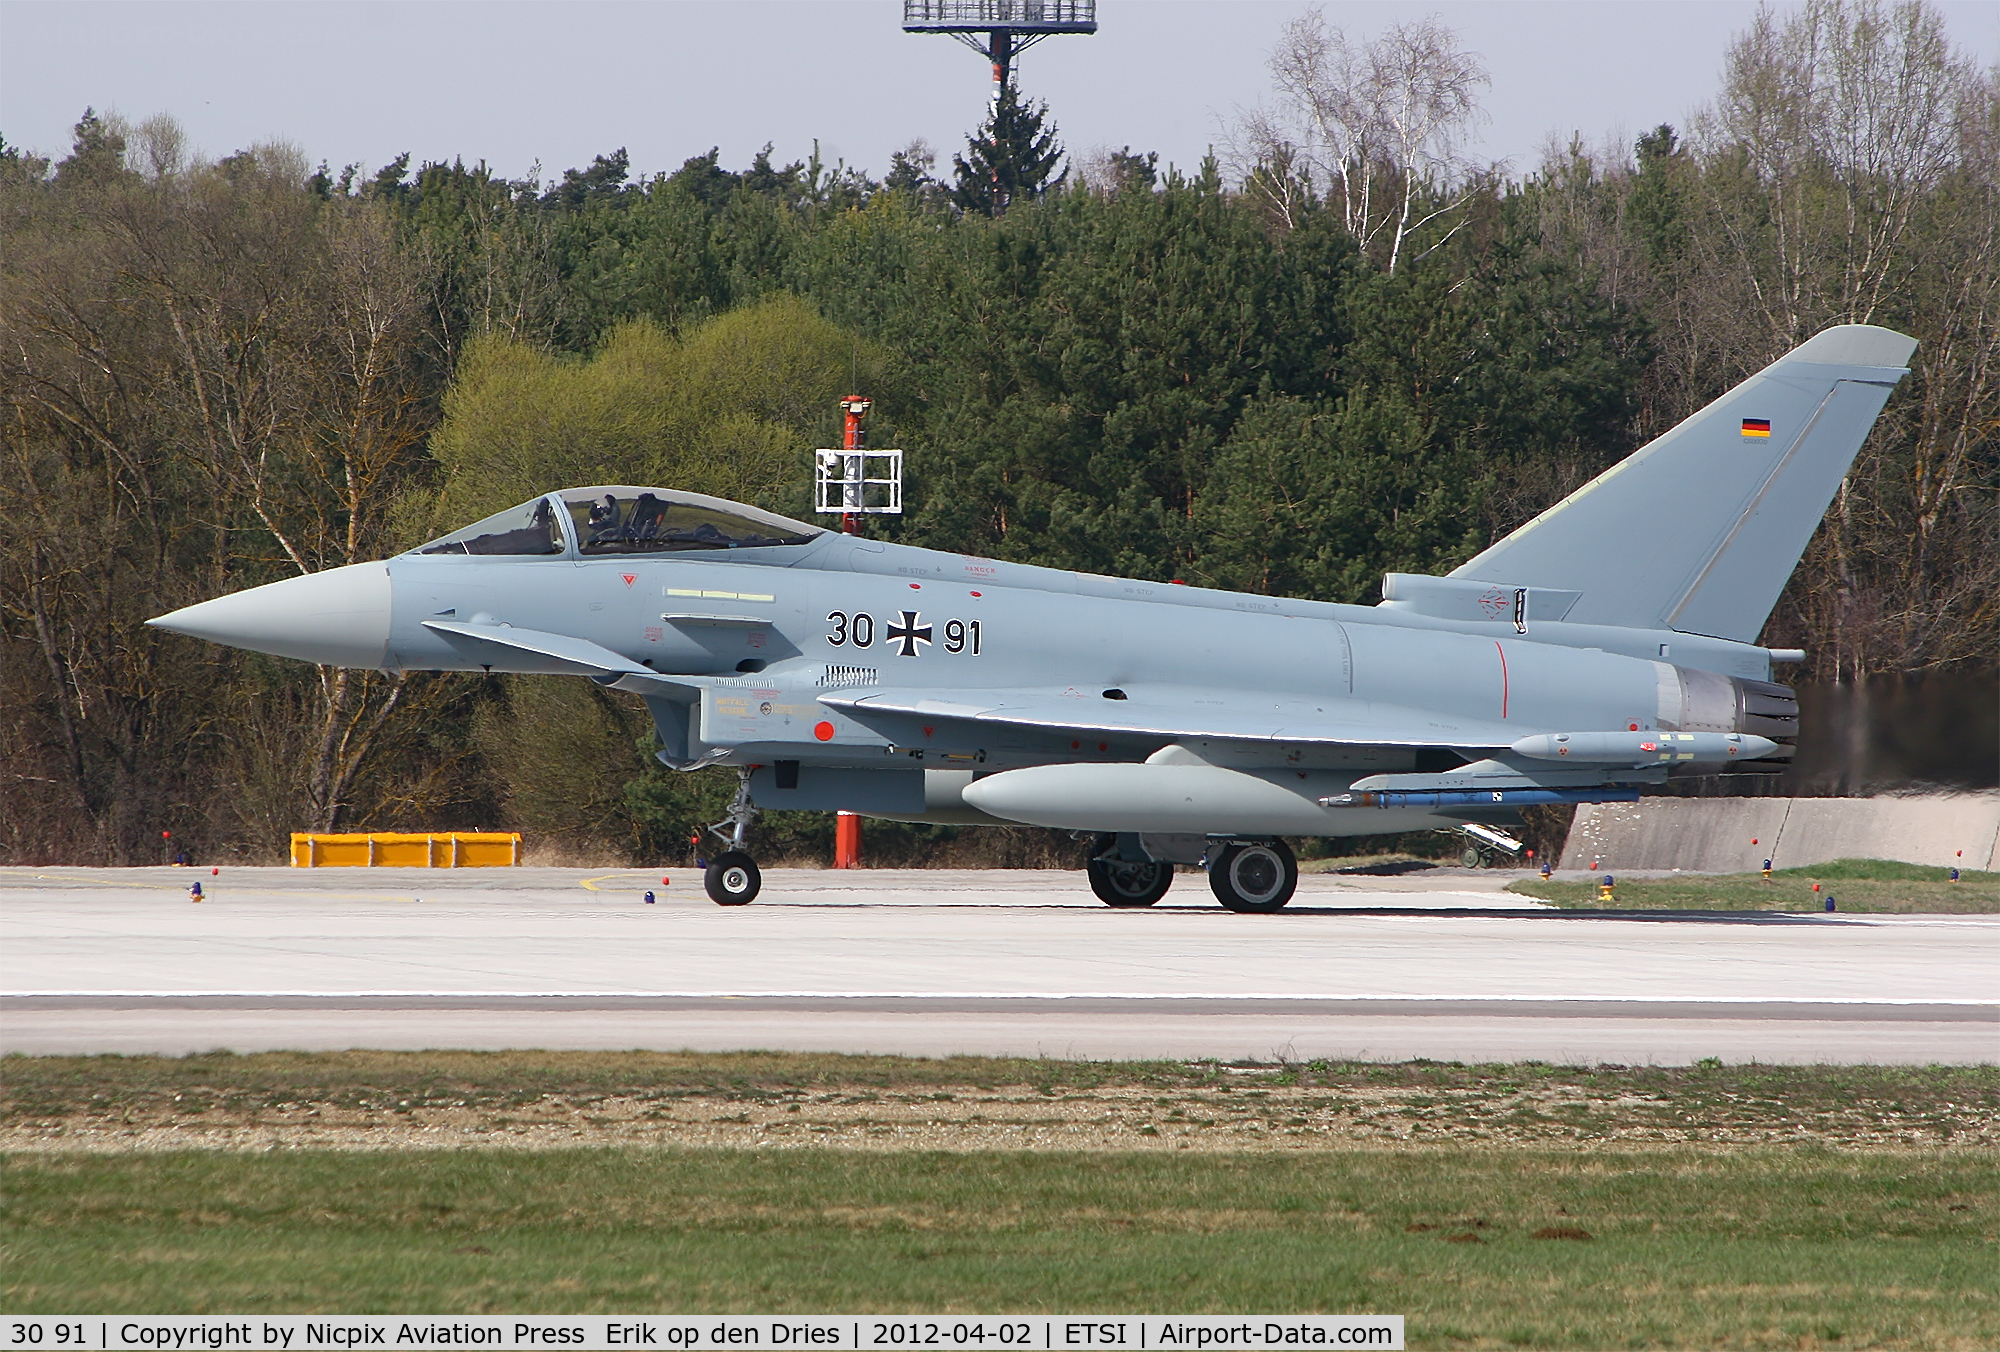 30 91, Eurofighter EF-2000 Typhoon S C/N GS070, 3091 is abrand new Eurofighter and is seen here on the runway for a test flight